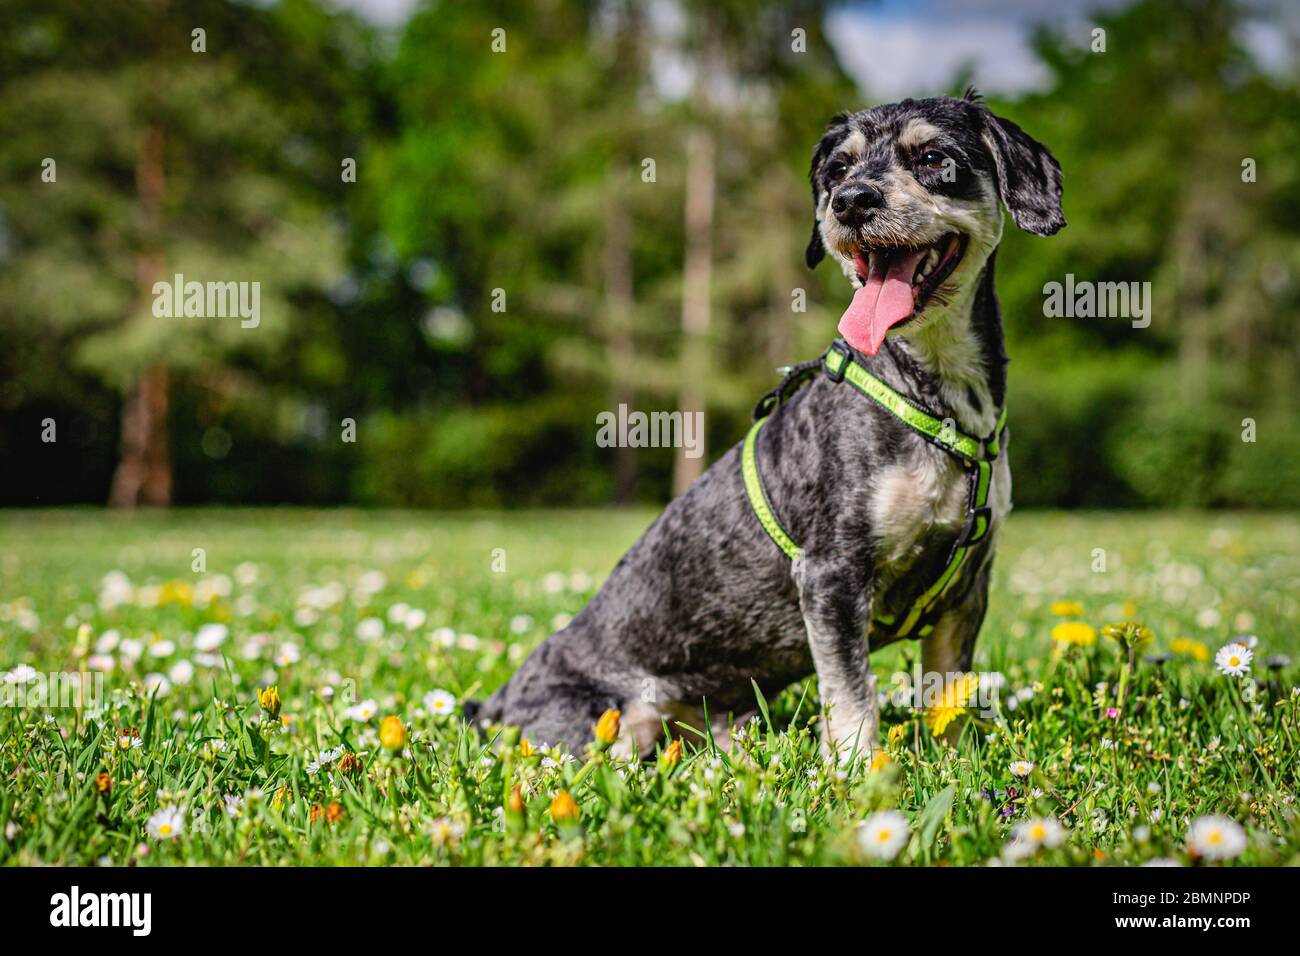 Portrait of a happy havanese dog with open mouth, sticking out a pink tongue, sitting on green grass with yellow dandelions and white daisy flowers. Stock Photo